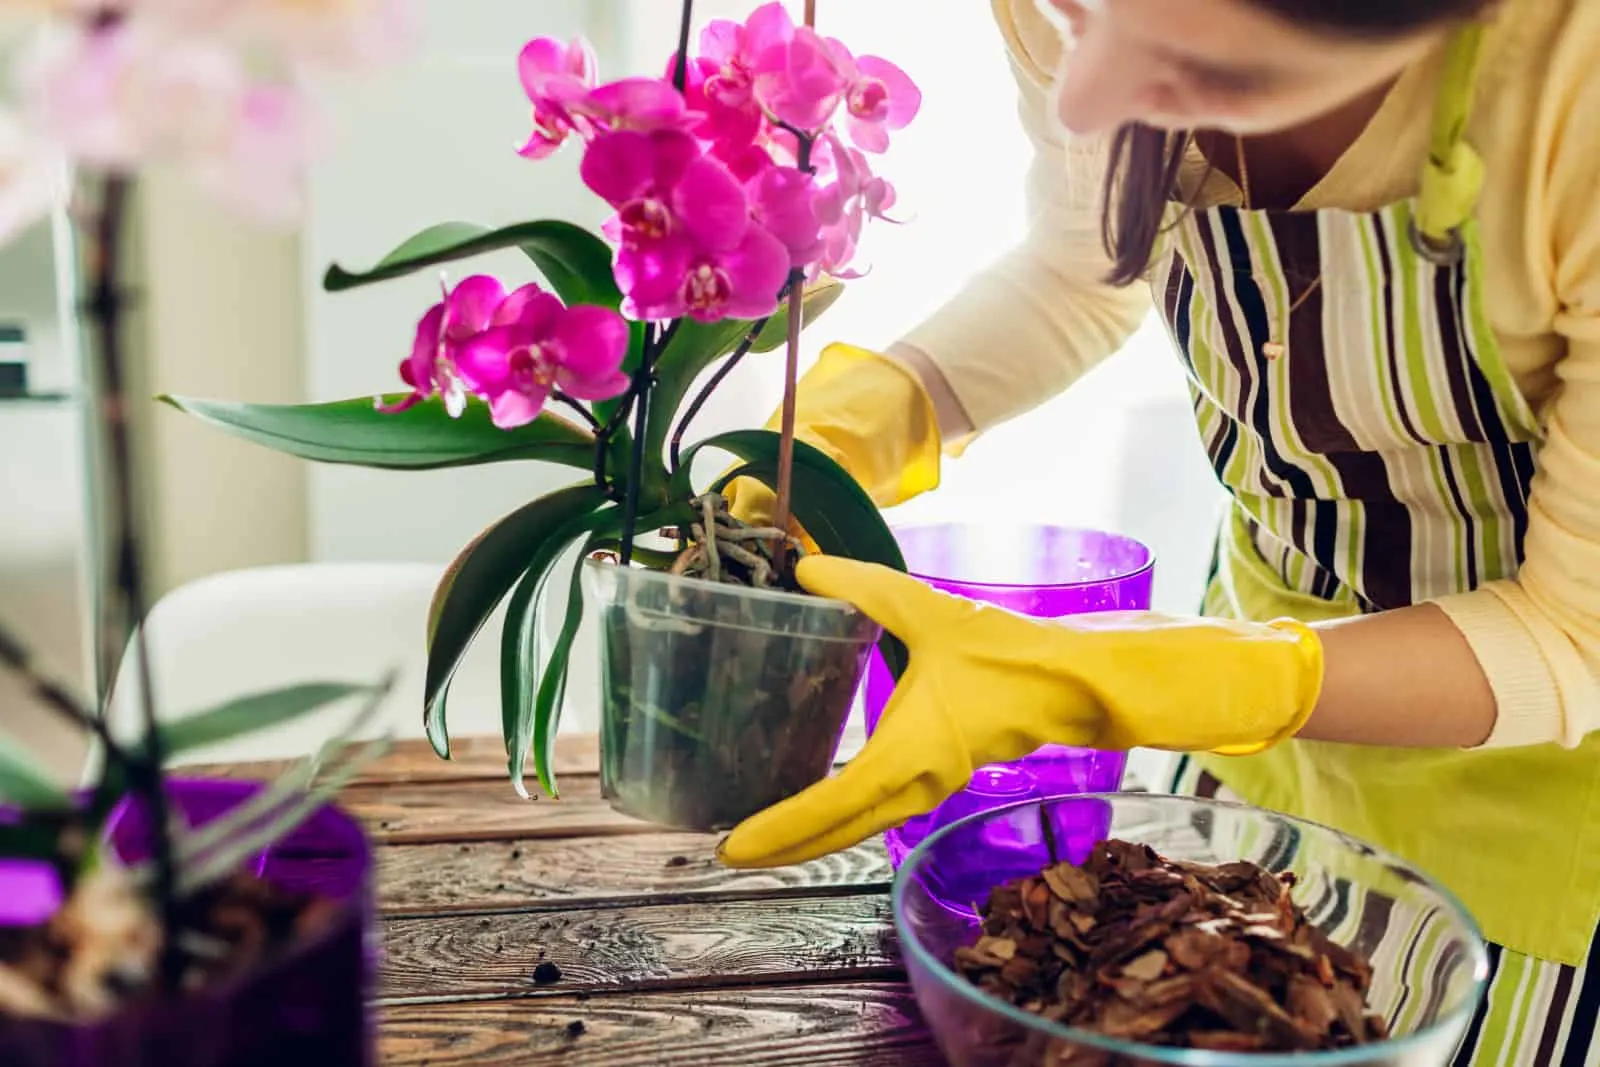 Woman transplanting orchid into another pot on kitchen.